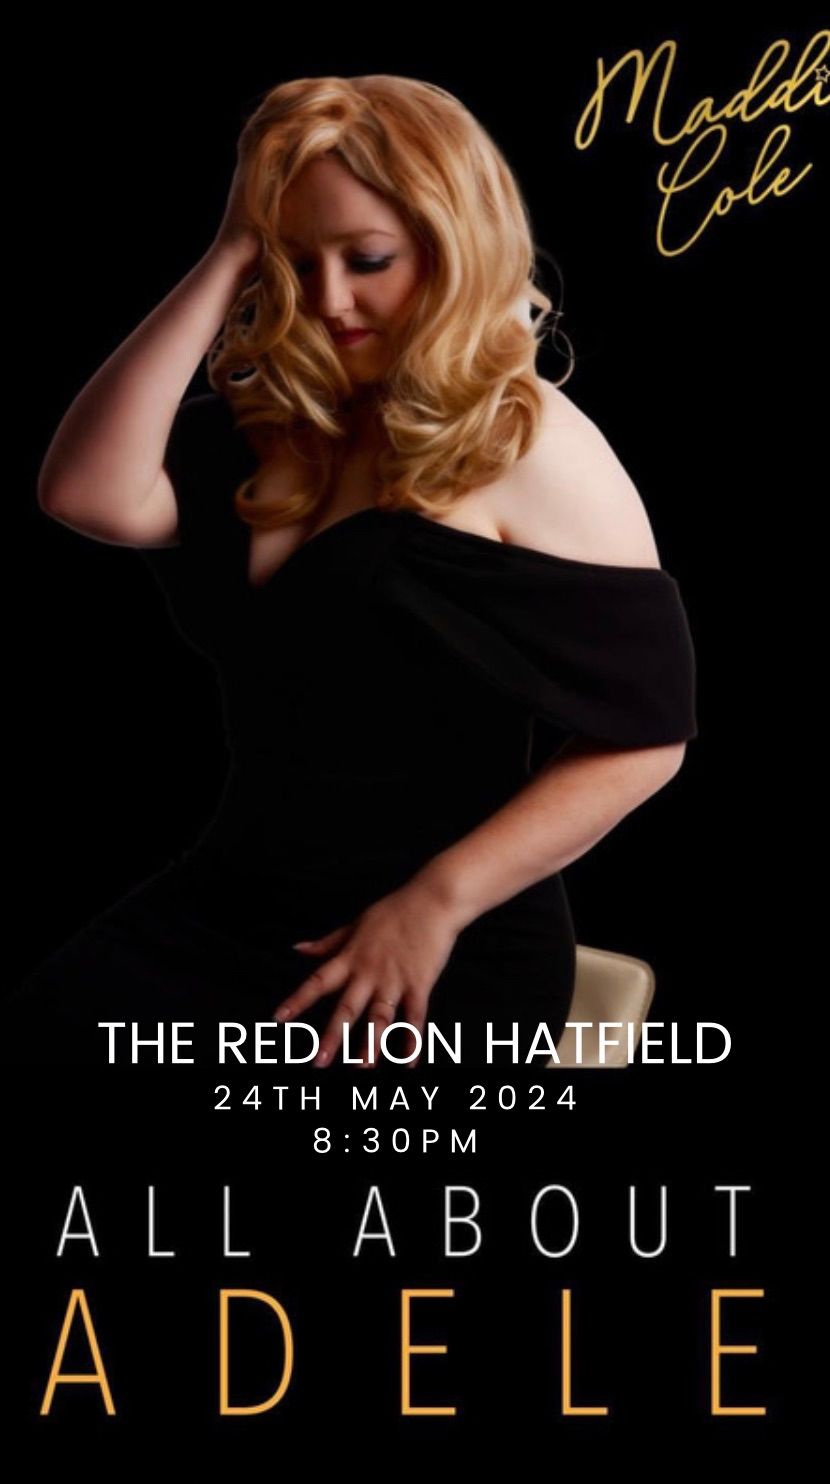 ADELE @ The Red Lion 